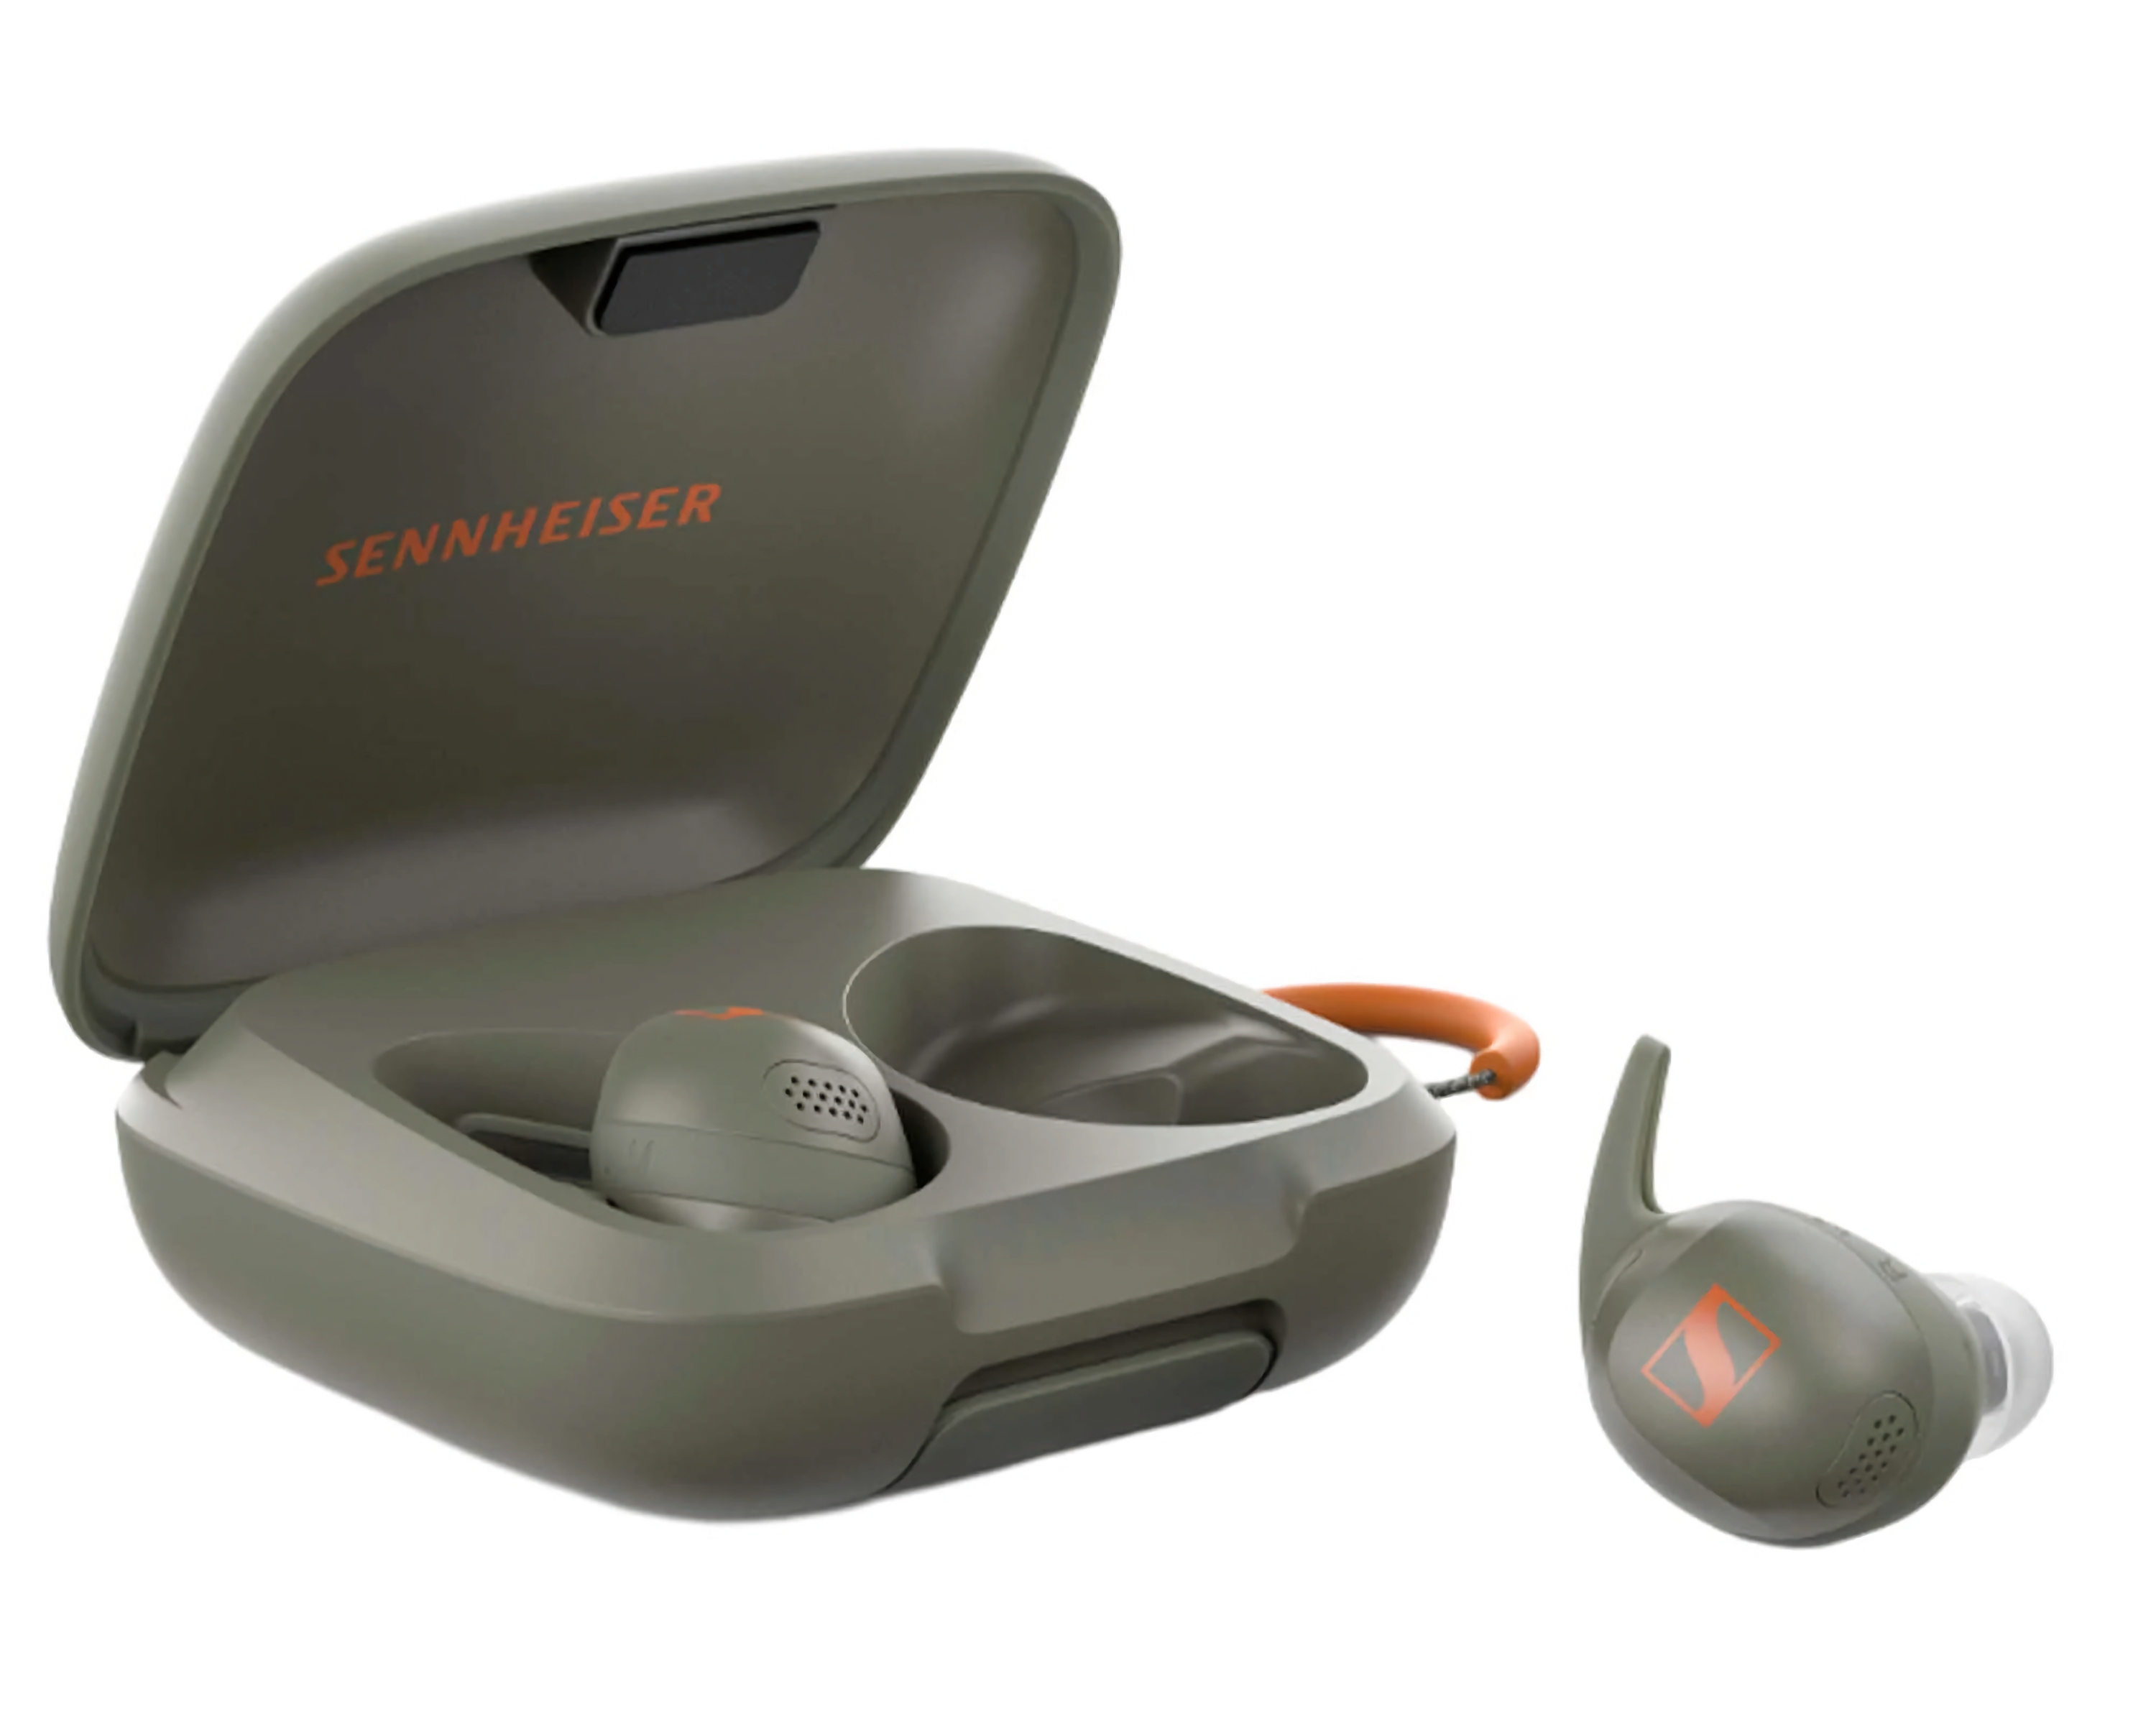 Sennheiser Momentum Sport with body temperature and heart rate measurement is now on sale